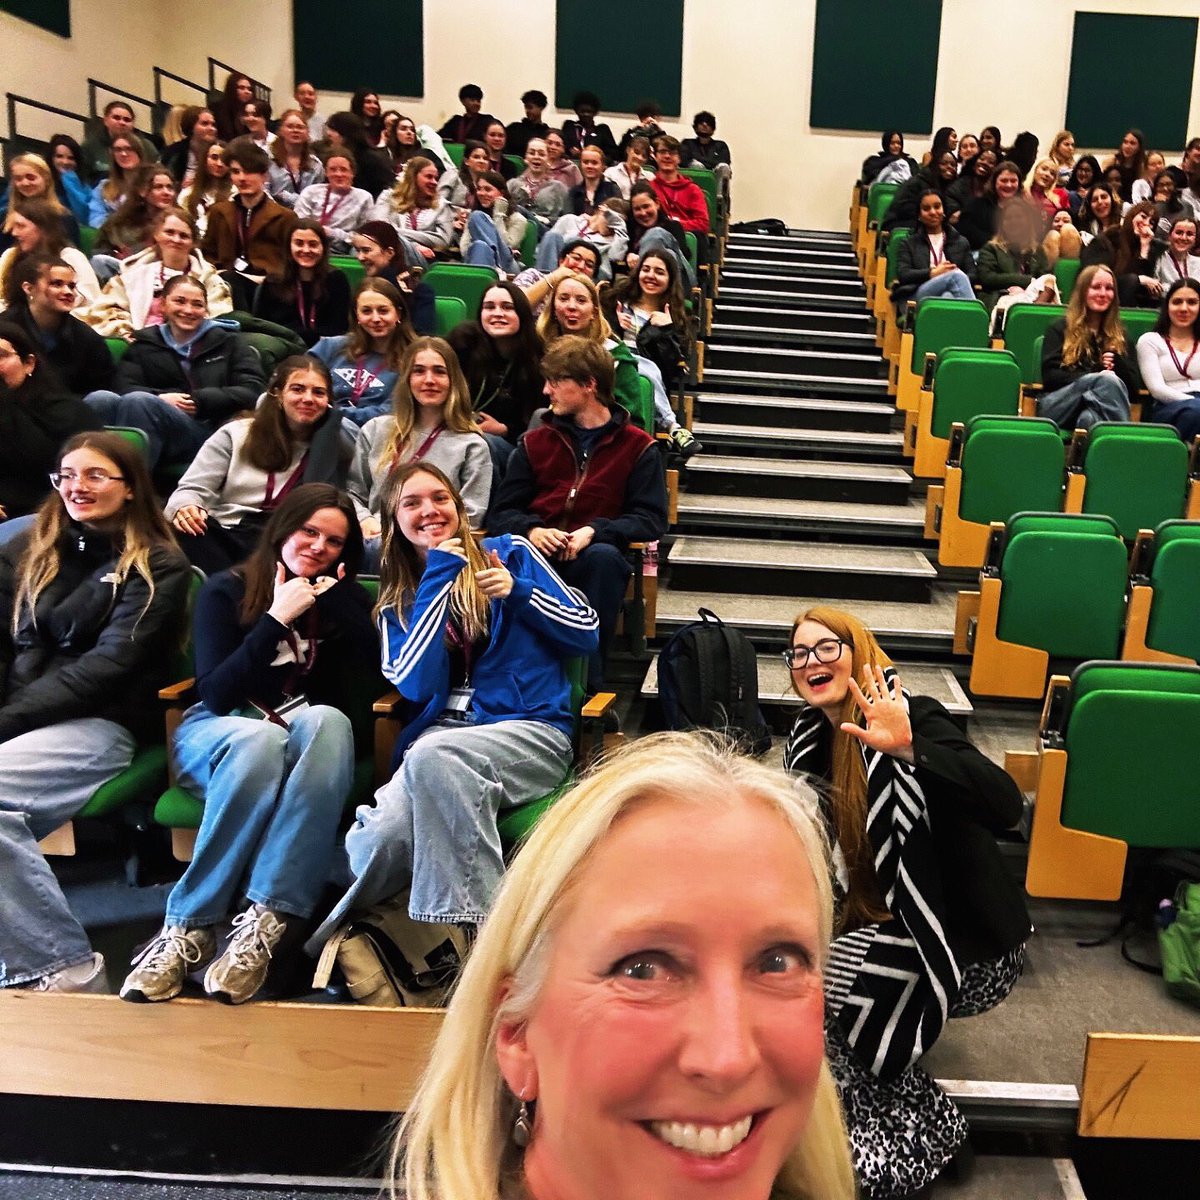 Y12 had a visit from Dr Roz Savage MBE, who spoke about her life journey, embarking on challenges & finding motivation. Roz is the first (and only) woman to row solo across the Big Three oceans. Thanks to Roz for being a great example that #everythingispossible 💪👏🔥